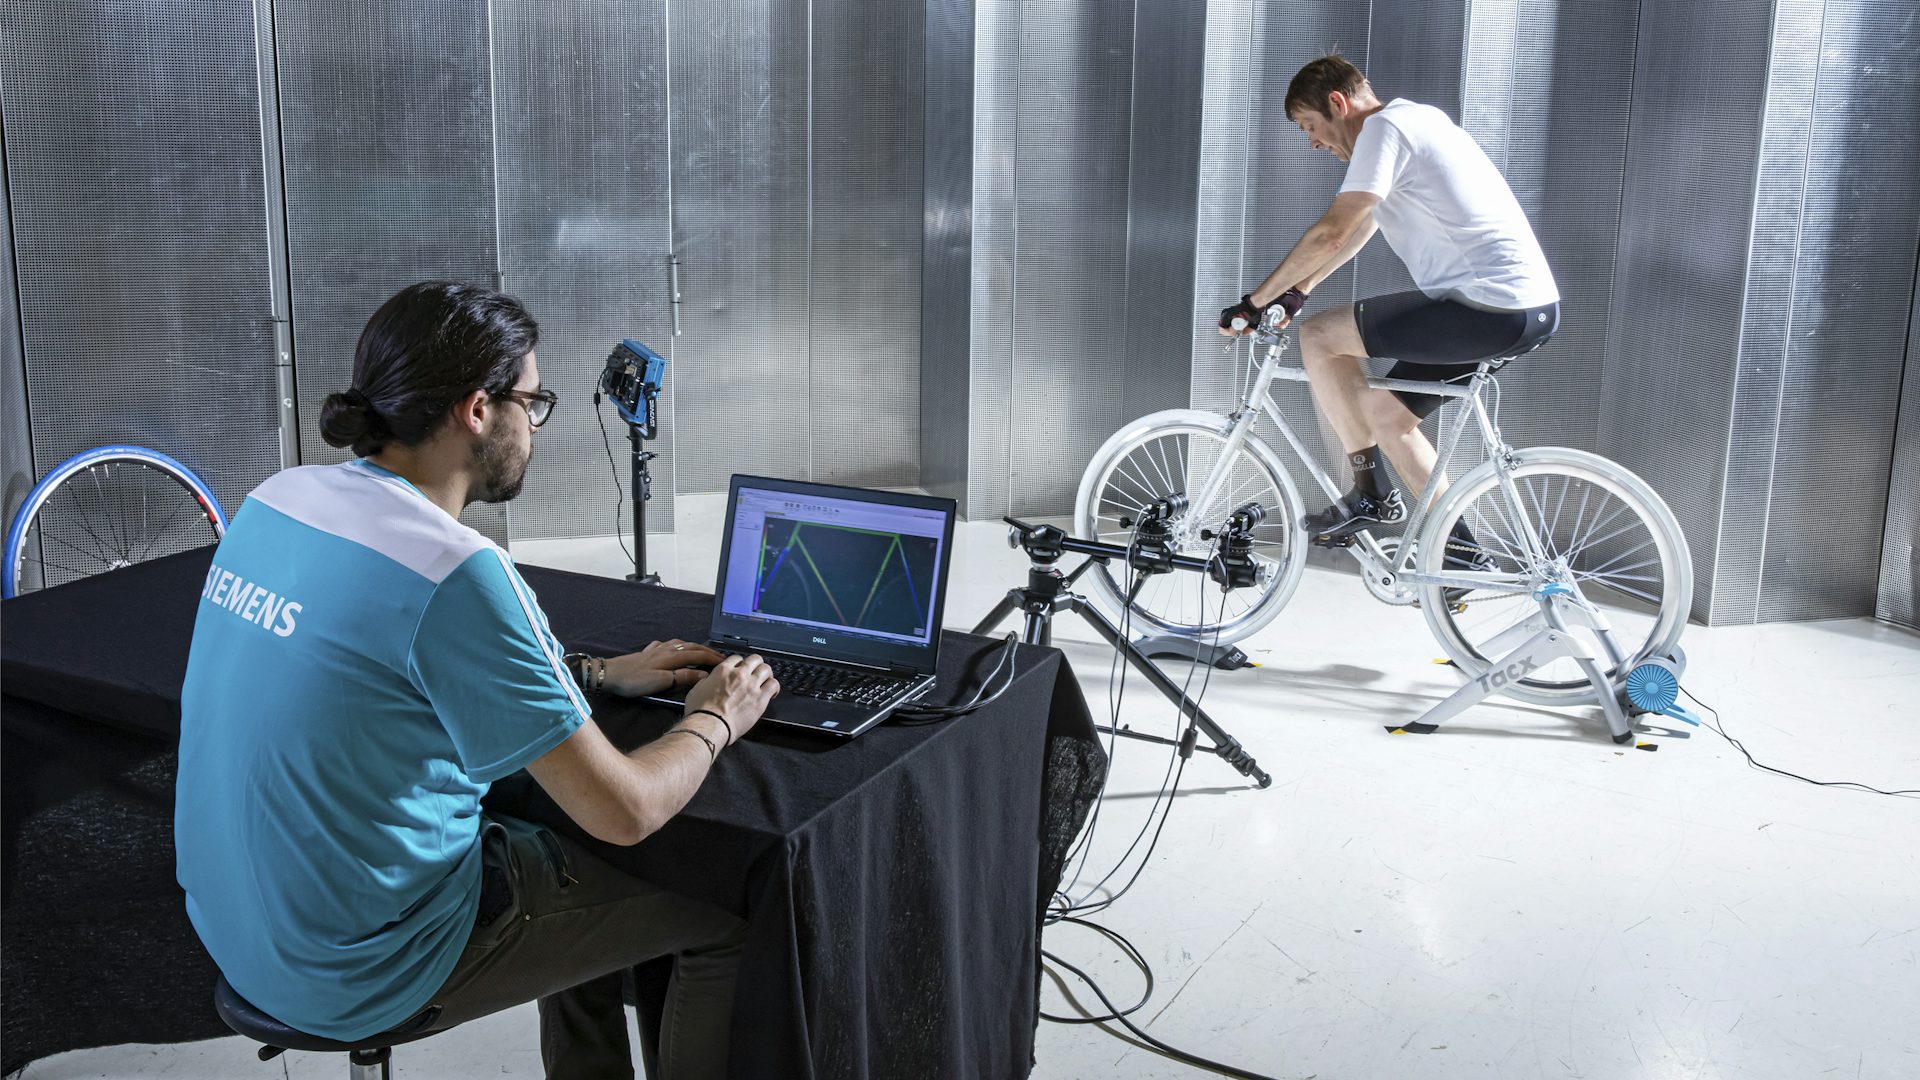 Man using digital image correlation (DIC) to measure 3D full-field data of a bicycle.